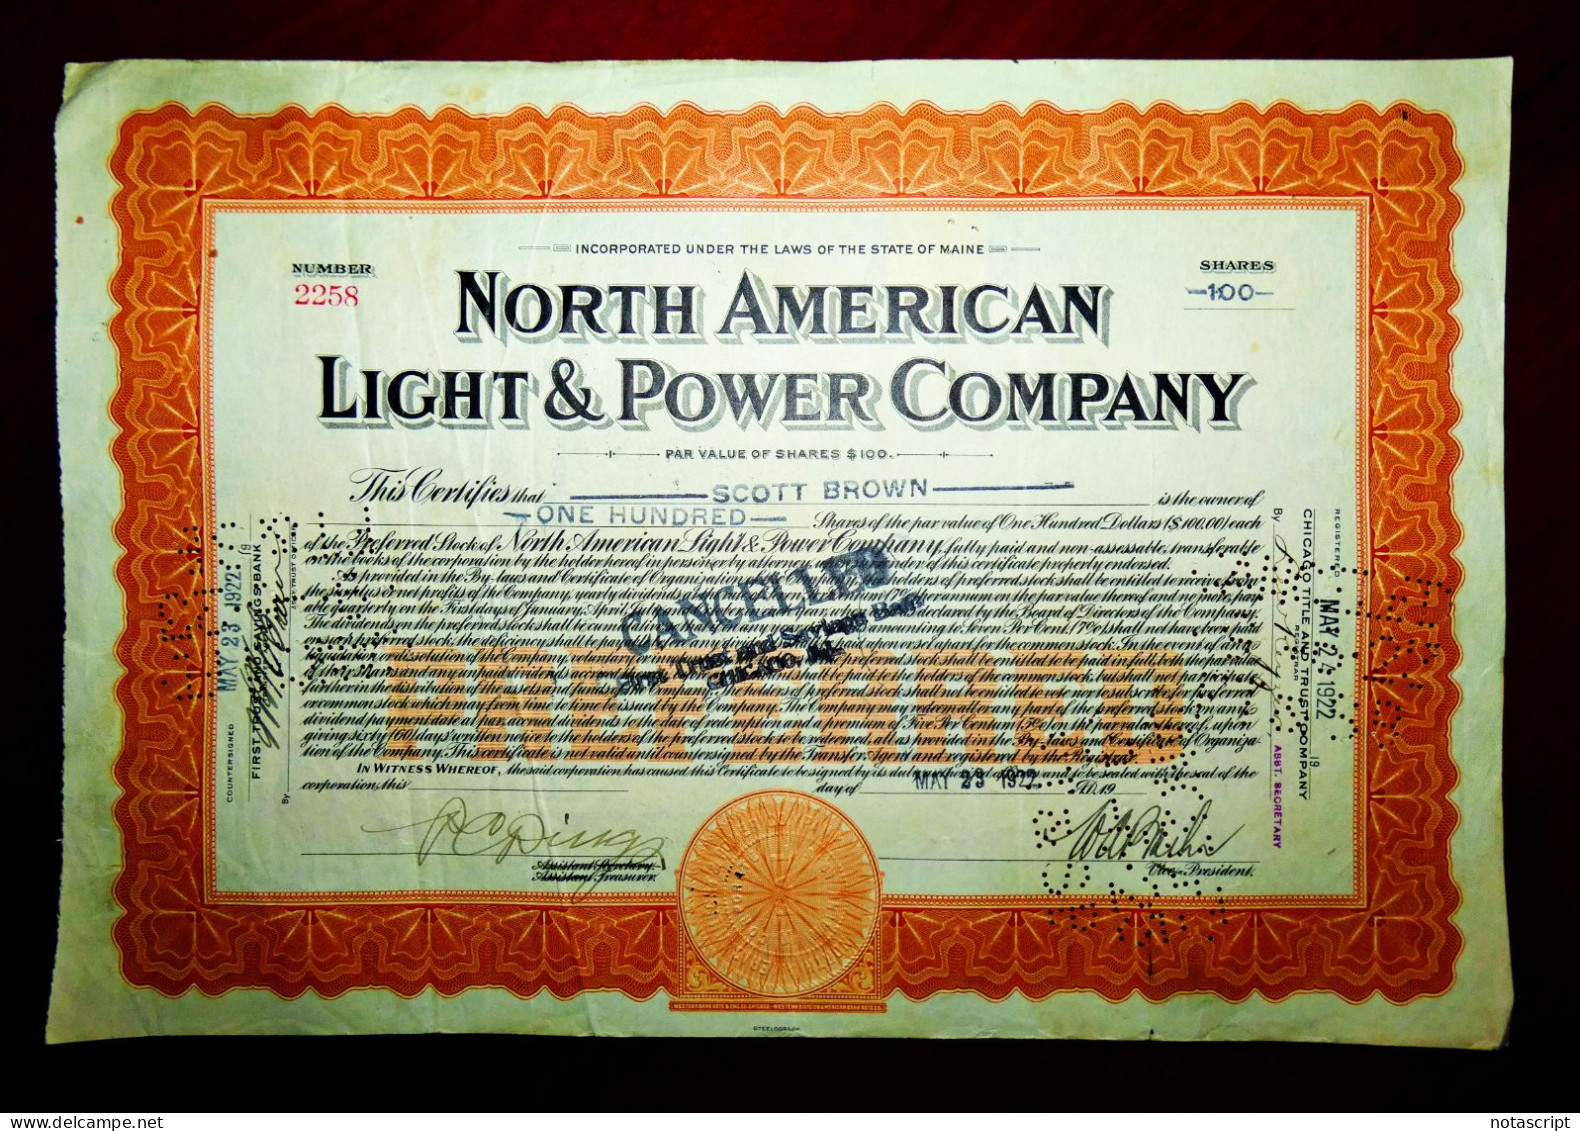 NORTH AMERICAN LIGHT & POWER COMPANY,Maine (US) 1921-23 Share Certificate,cancelled - Electricité & Gaz